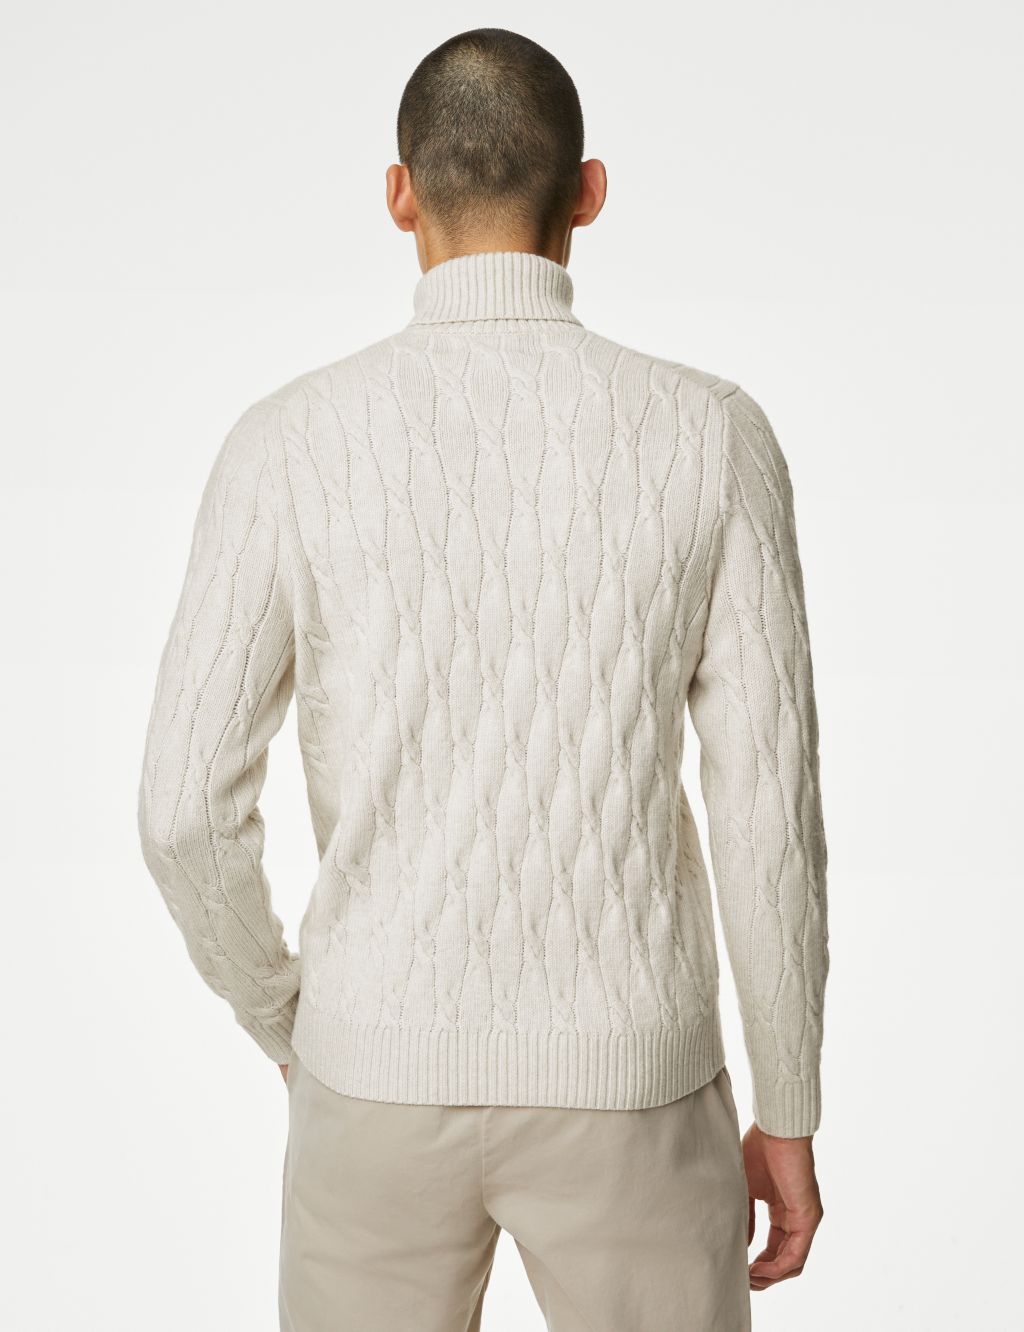 Cable High Neck Jumper image 6